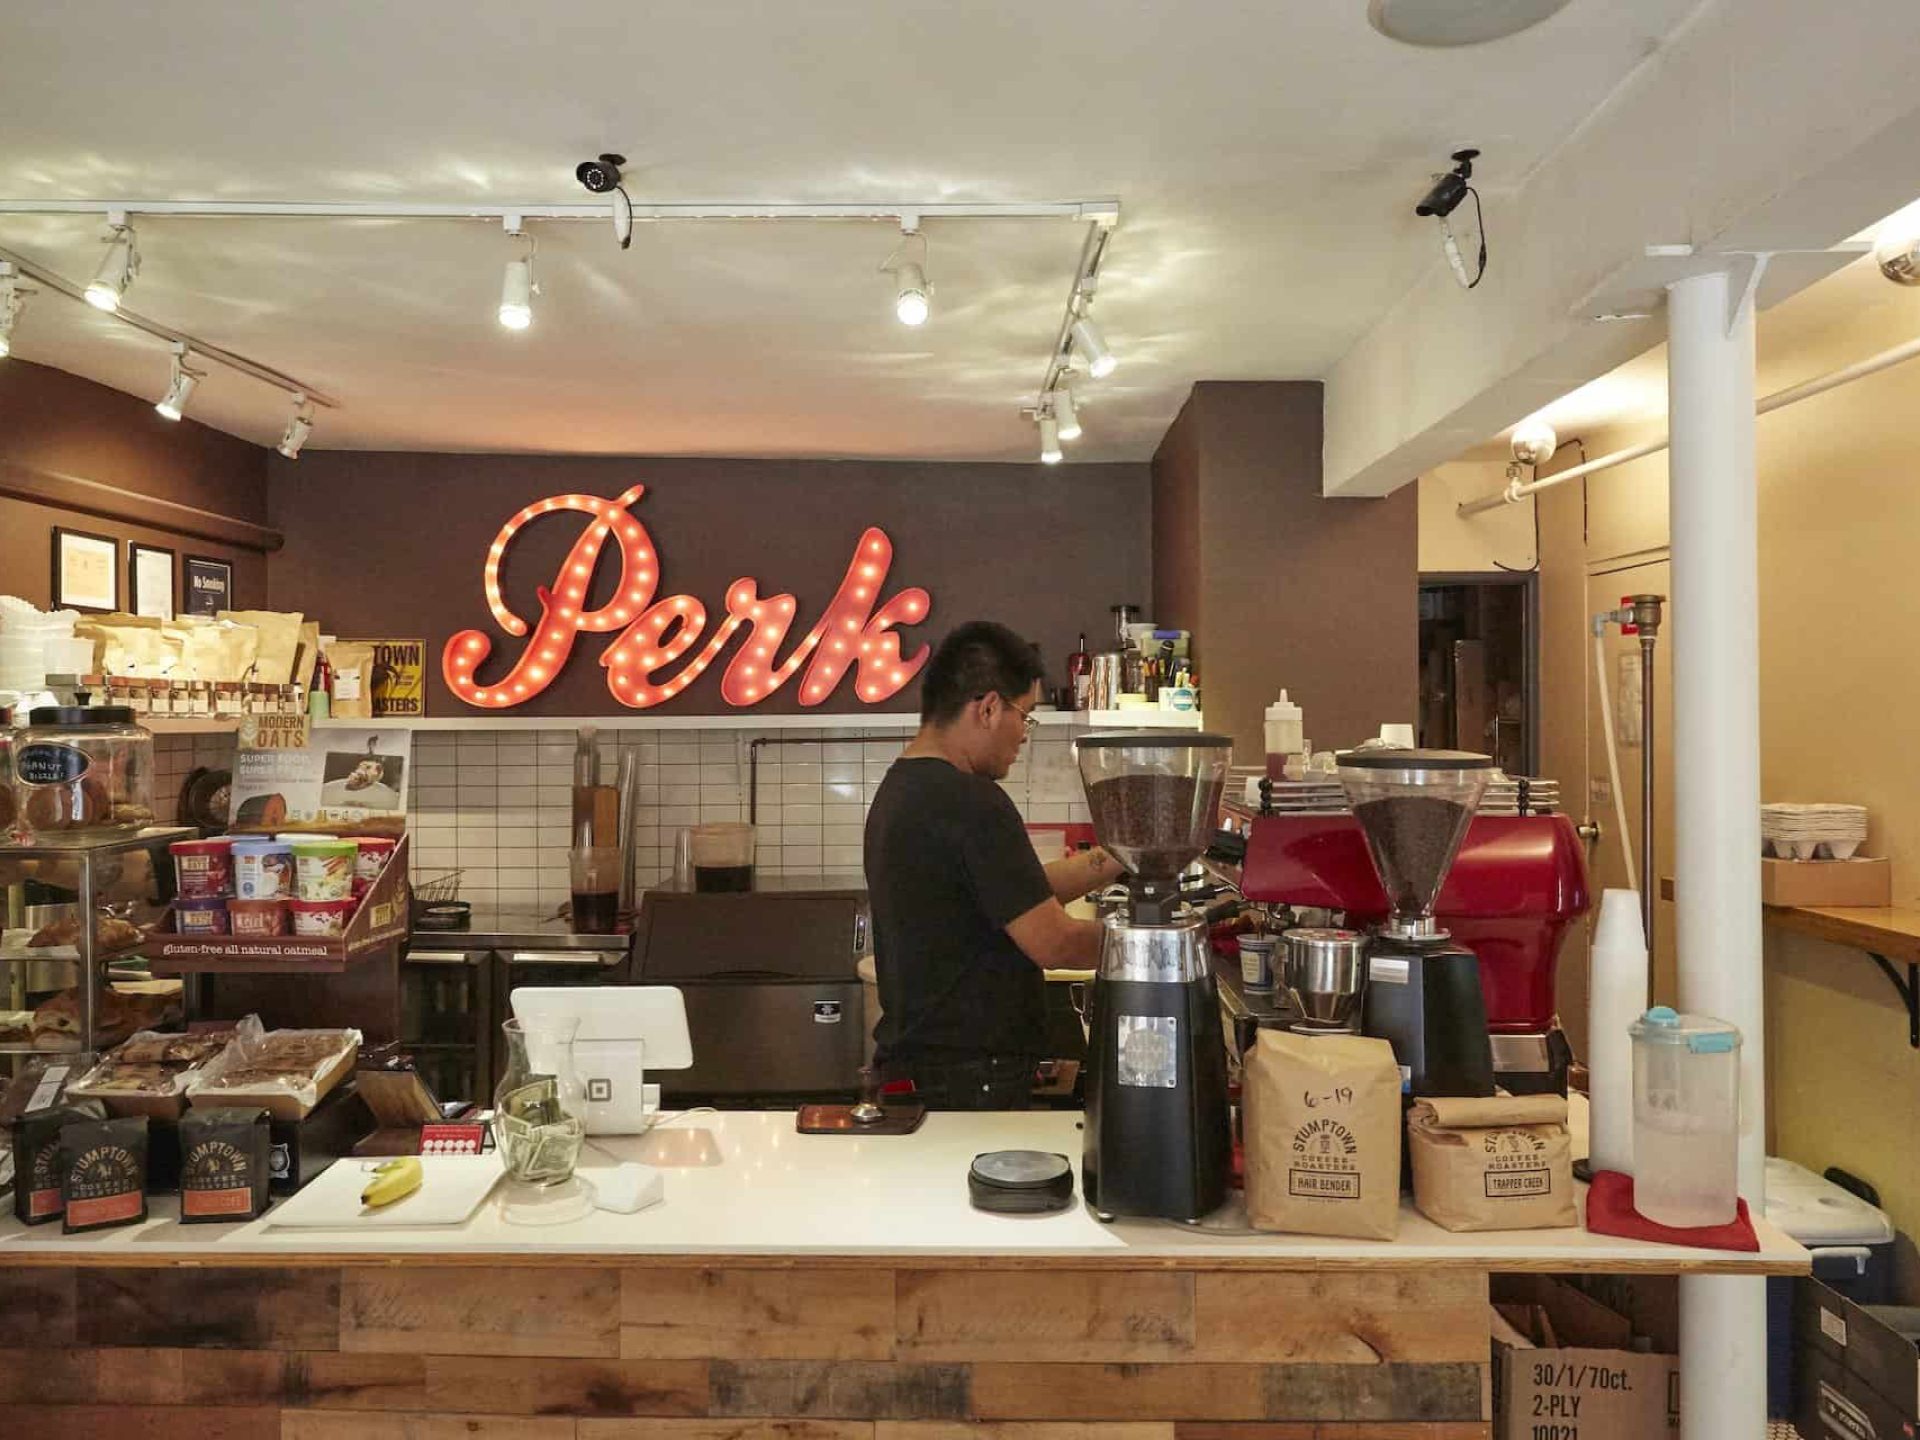 Interior of "Perk" coffee shop in Murray Hill. Lighted business sign on the back wall and a counter with coffee on display.